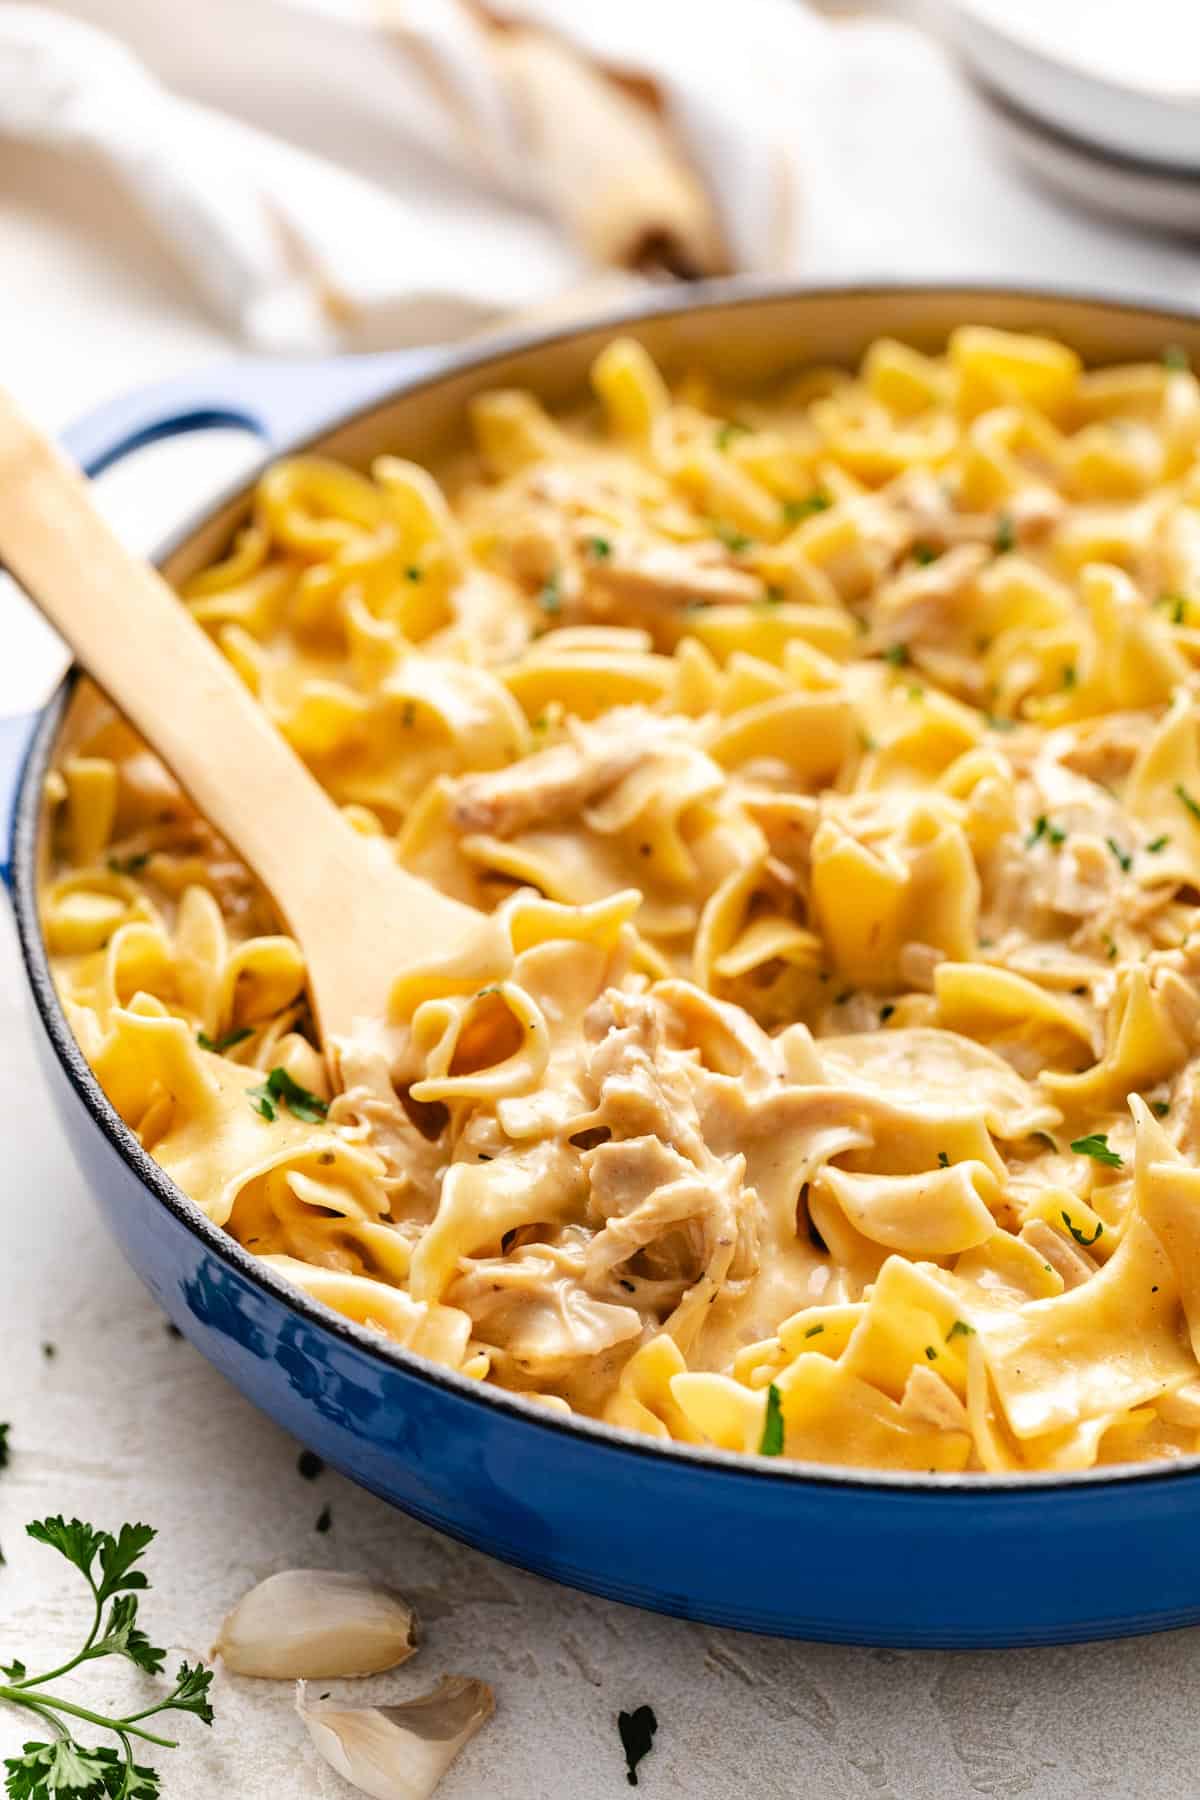 Blue pan holding egg noodles and shredded chicken.